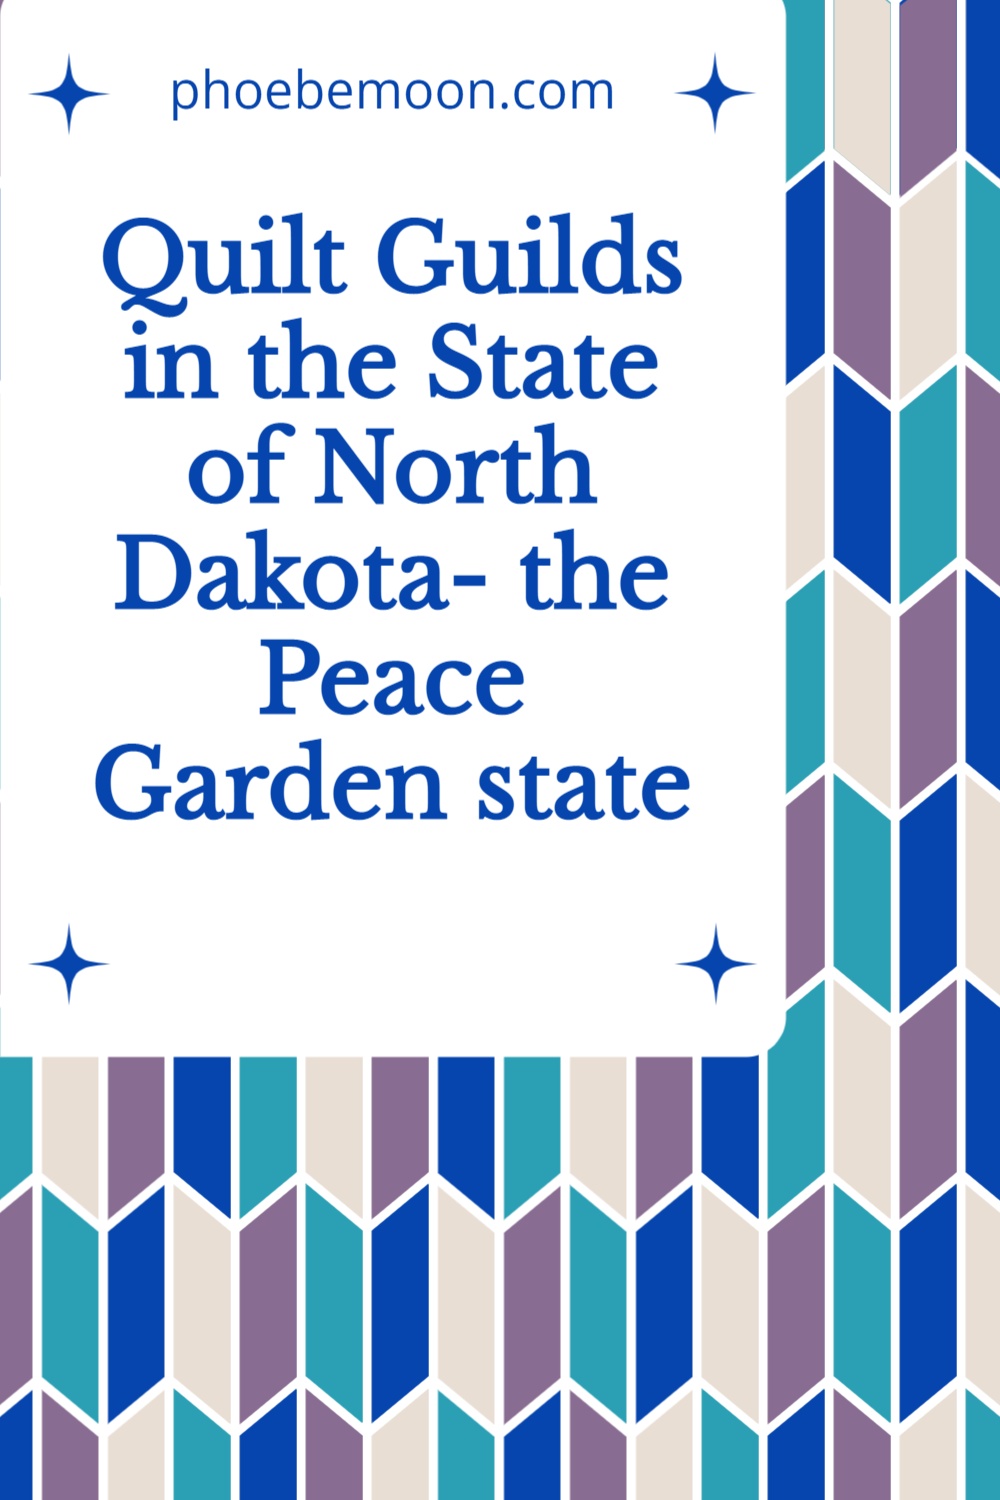 Quilting Guilds in North Dakota for quilters